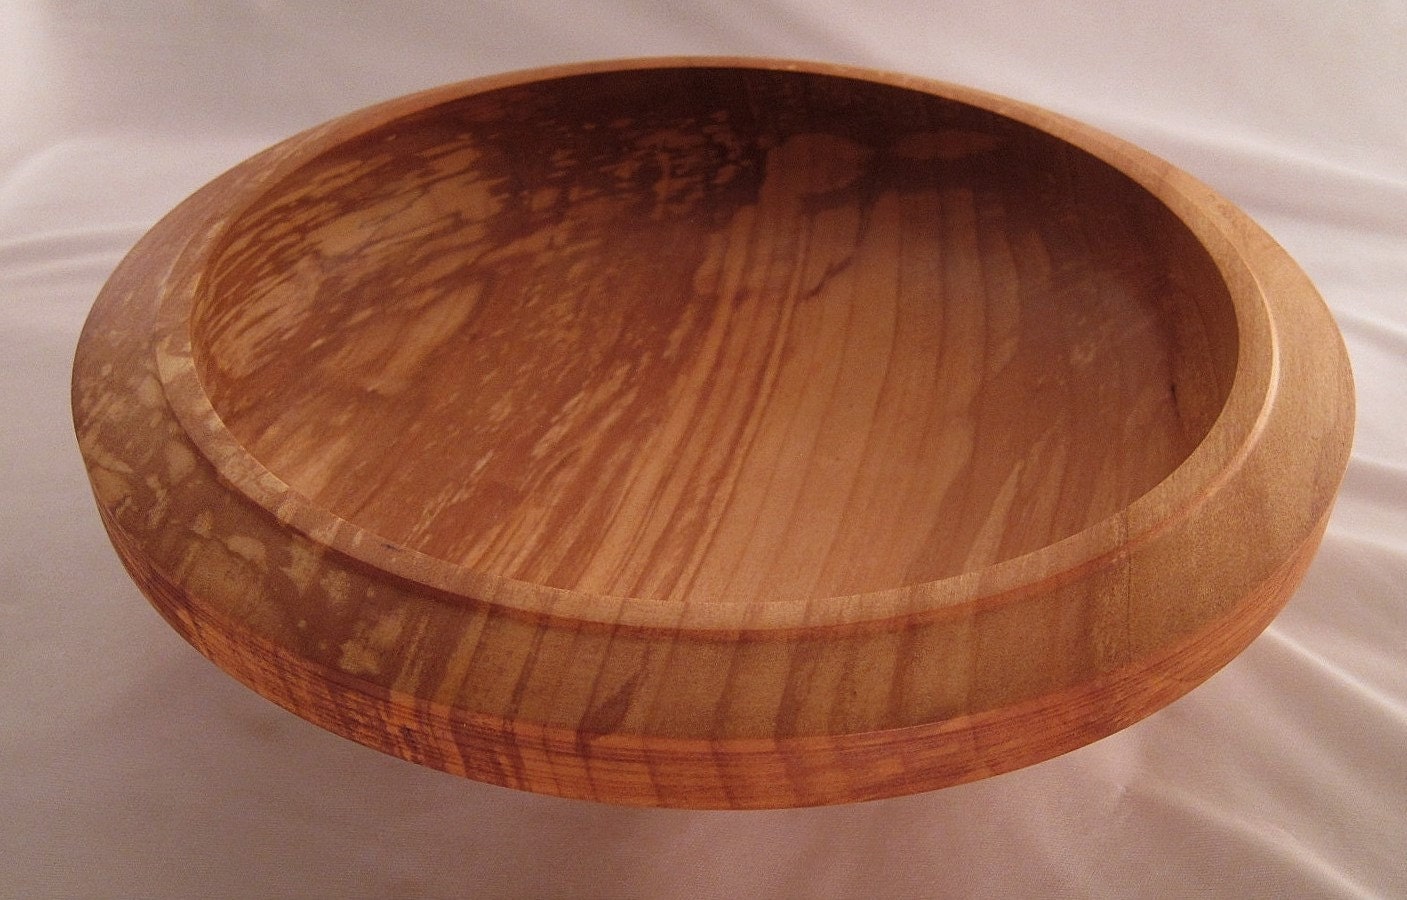 Willow Salad Bowl Wood Bowl Serving Bowl Fine by EccentricOldGuy